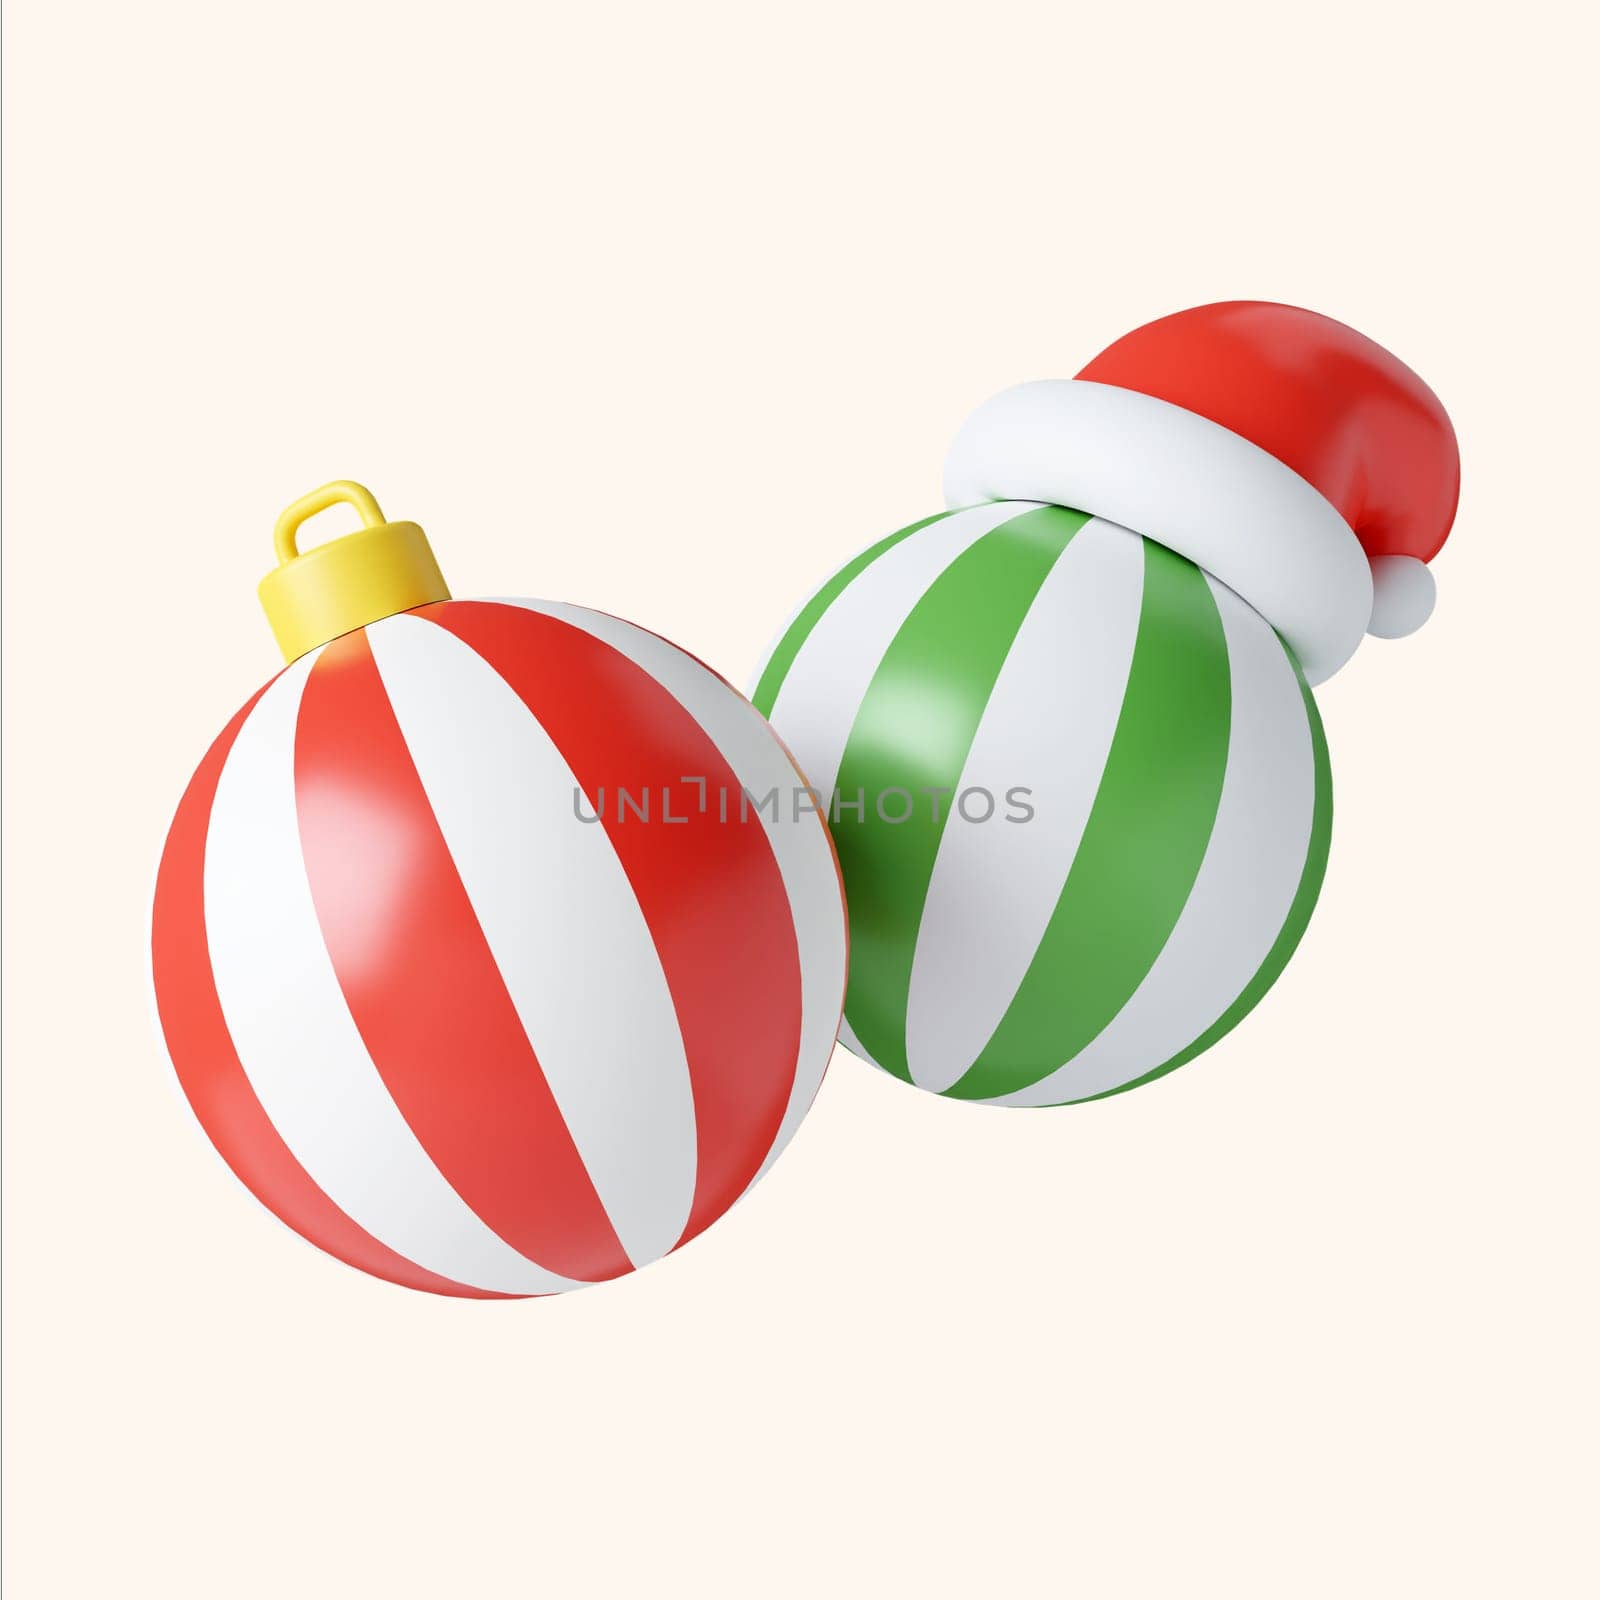 3d Christmas striped ball icon. minimal decorative festive conical shape tree. New Year's holiday decor. 3d design element In cartoon style. Icon isolated on white background. 3D illustration by meepiangraphic